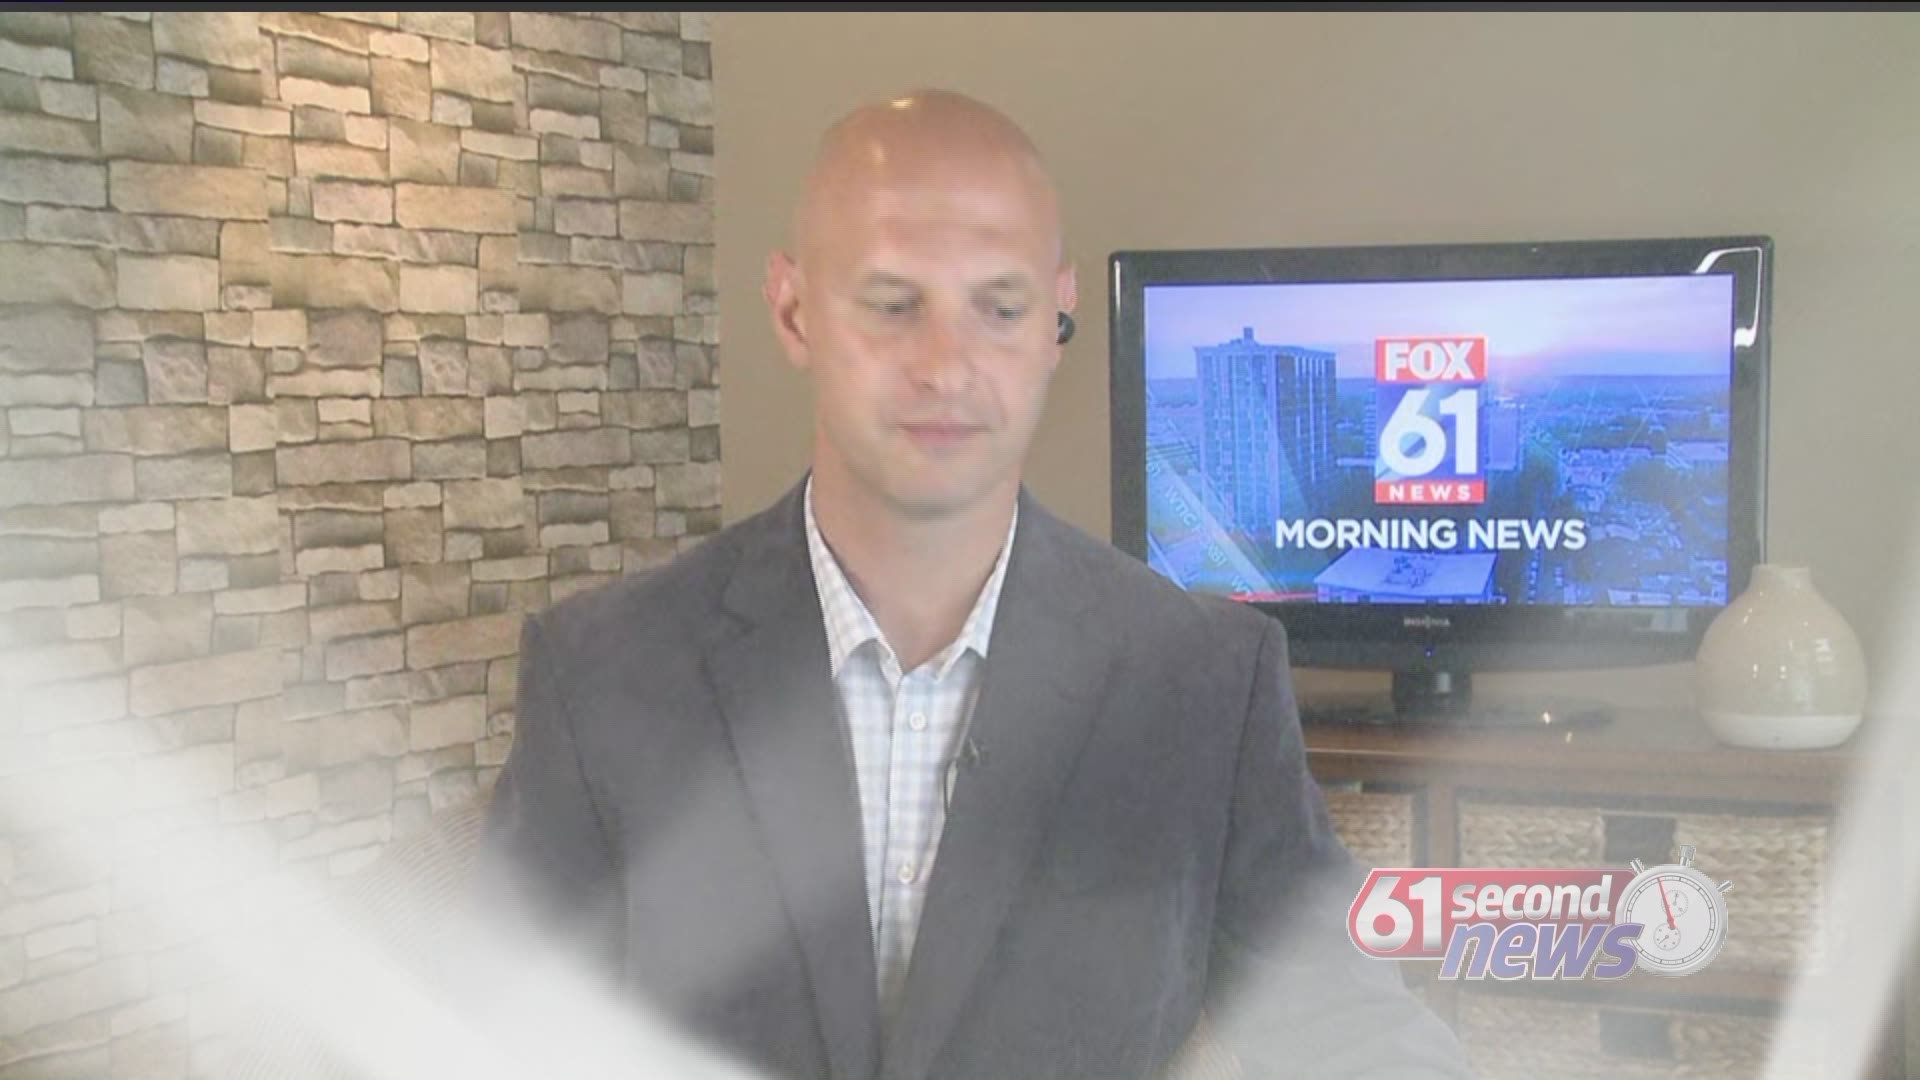 Tim Lammers has your #61SecondNews midday update.